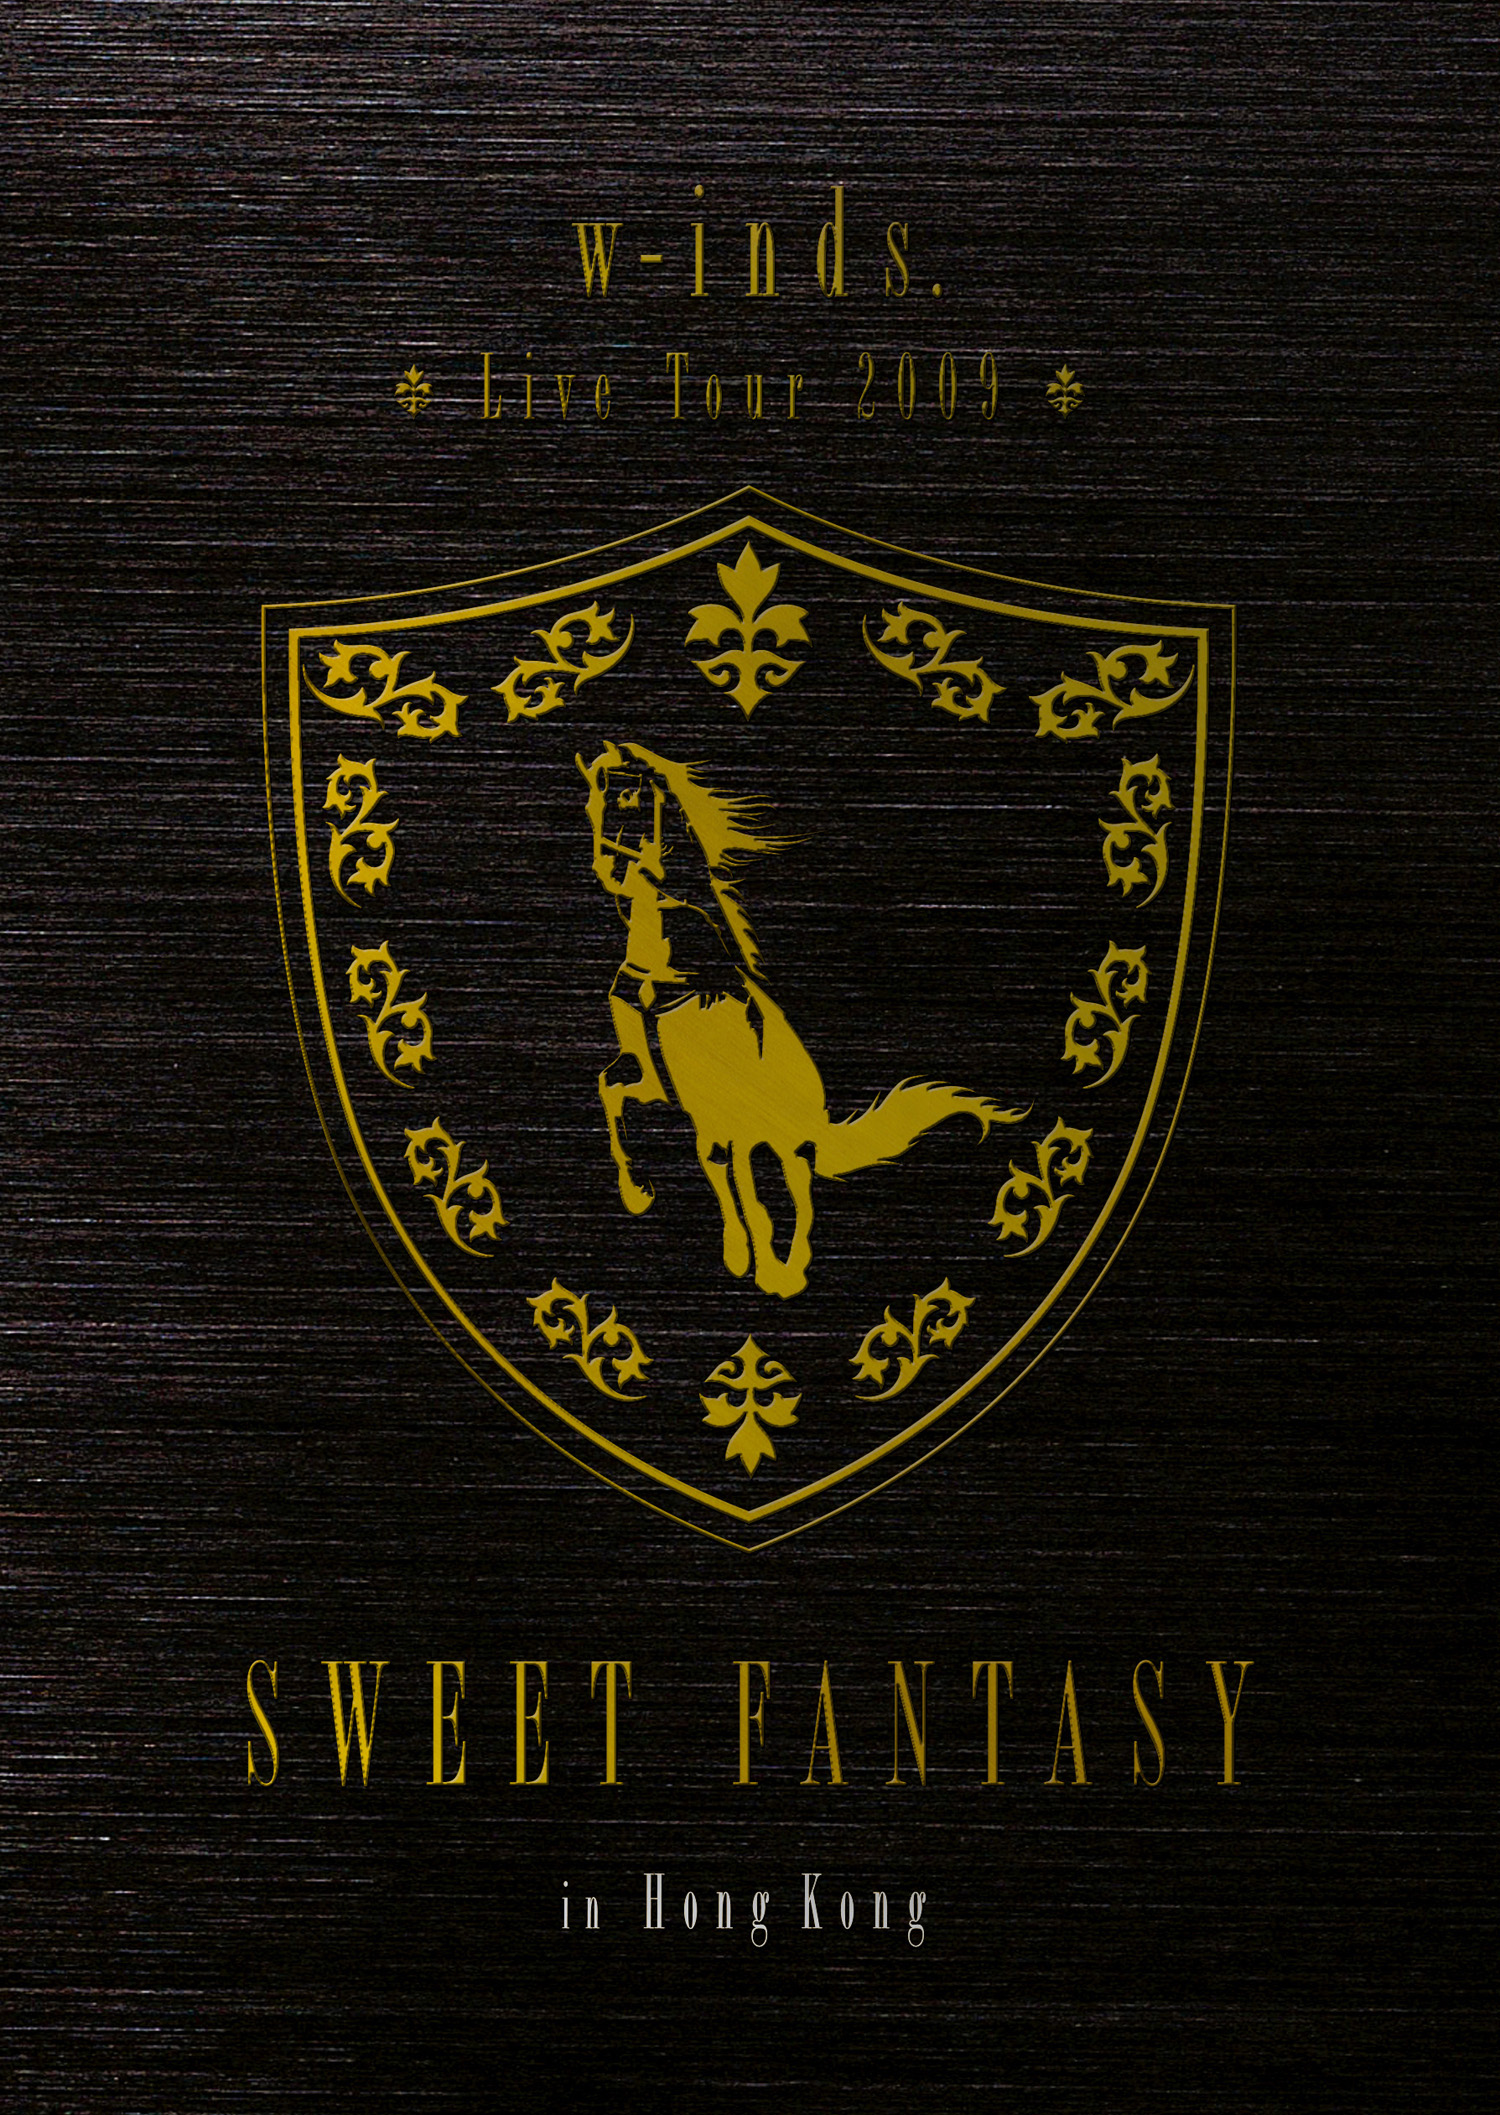 ⭐ w-inds. Live Tour 2009 Sweet Fantasy